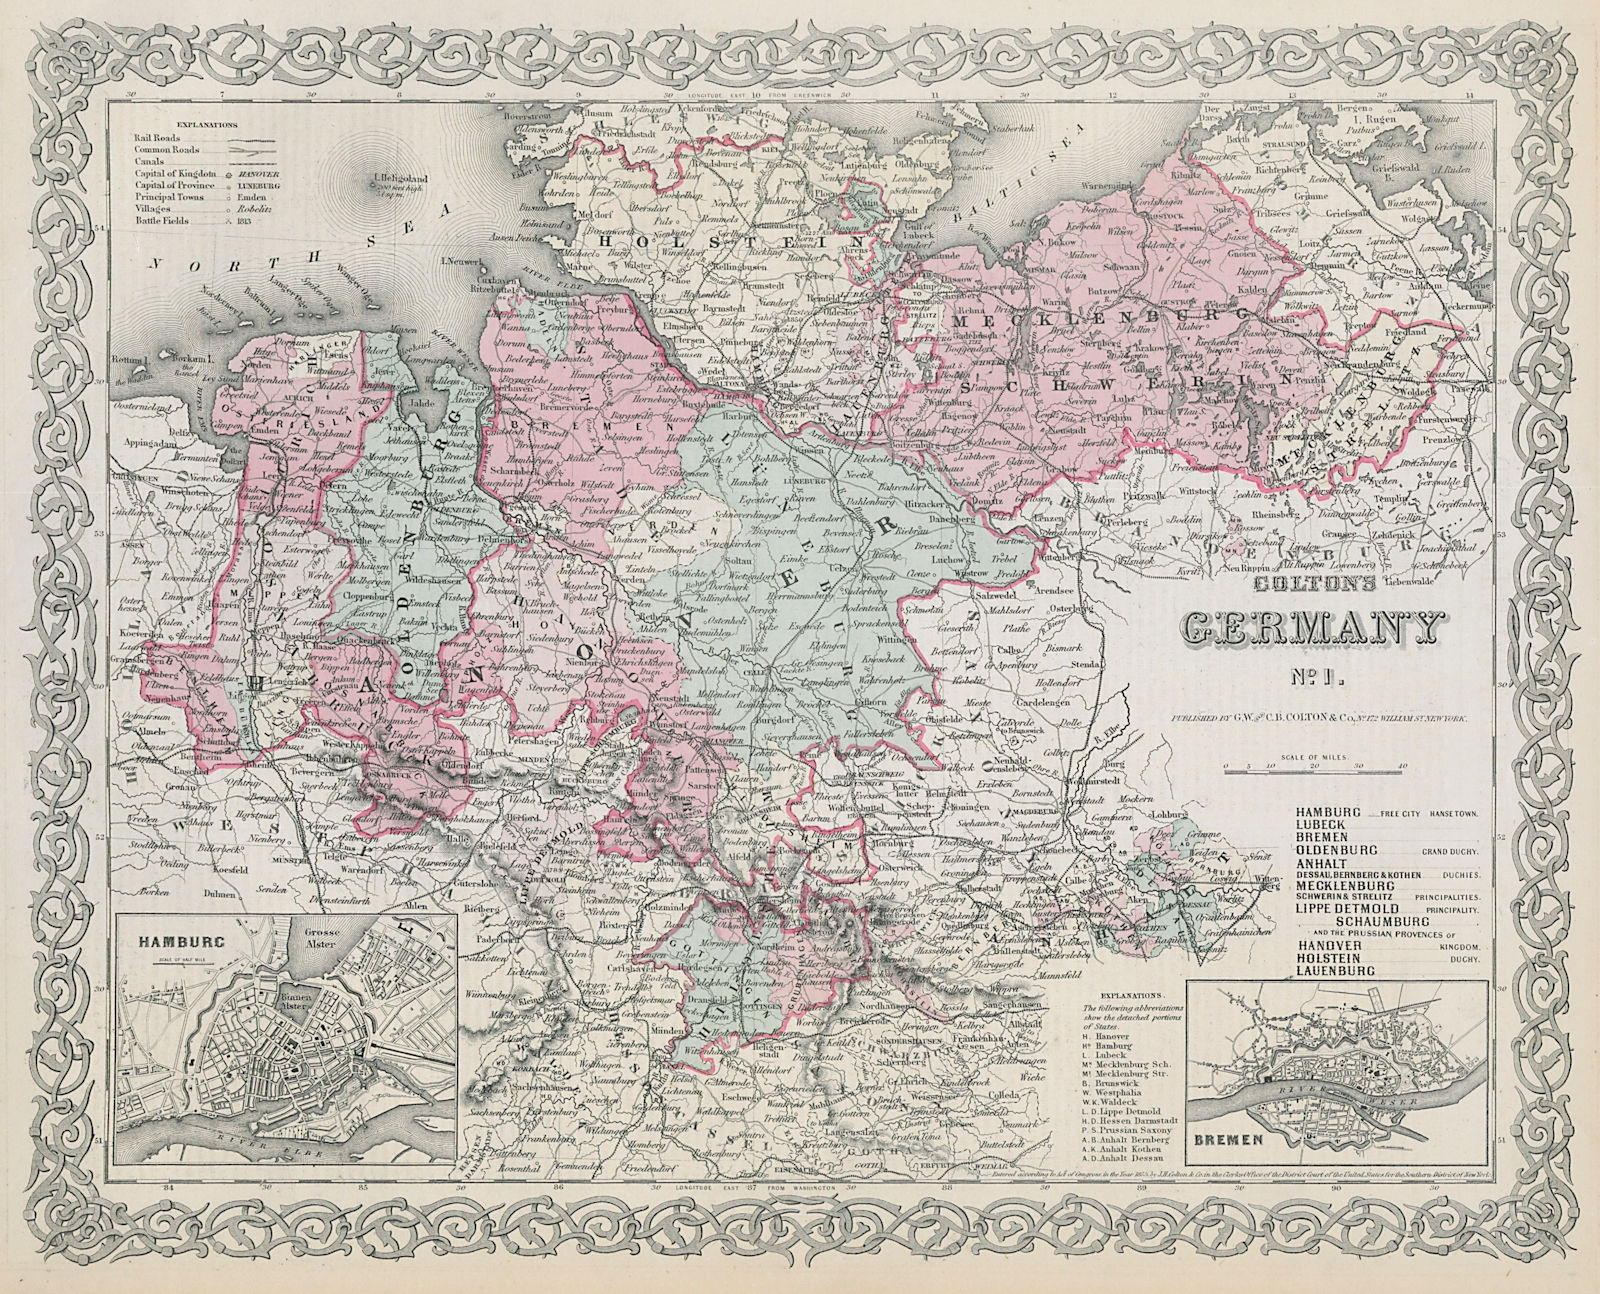 Associate Product Colton's Germany No 1. Northern Germany. Hamburg & Bremen plans 1869 old map